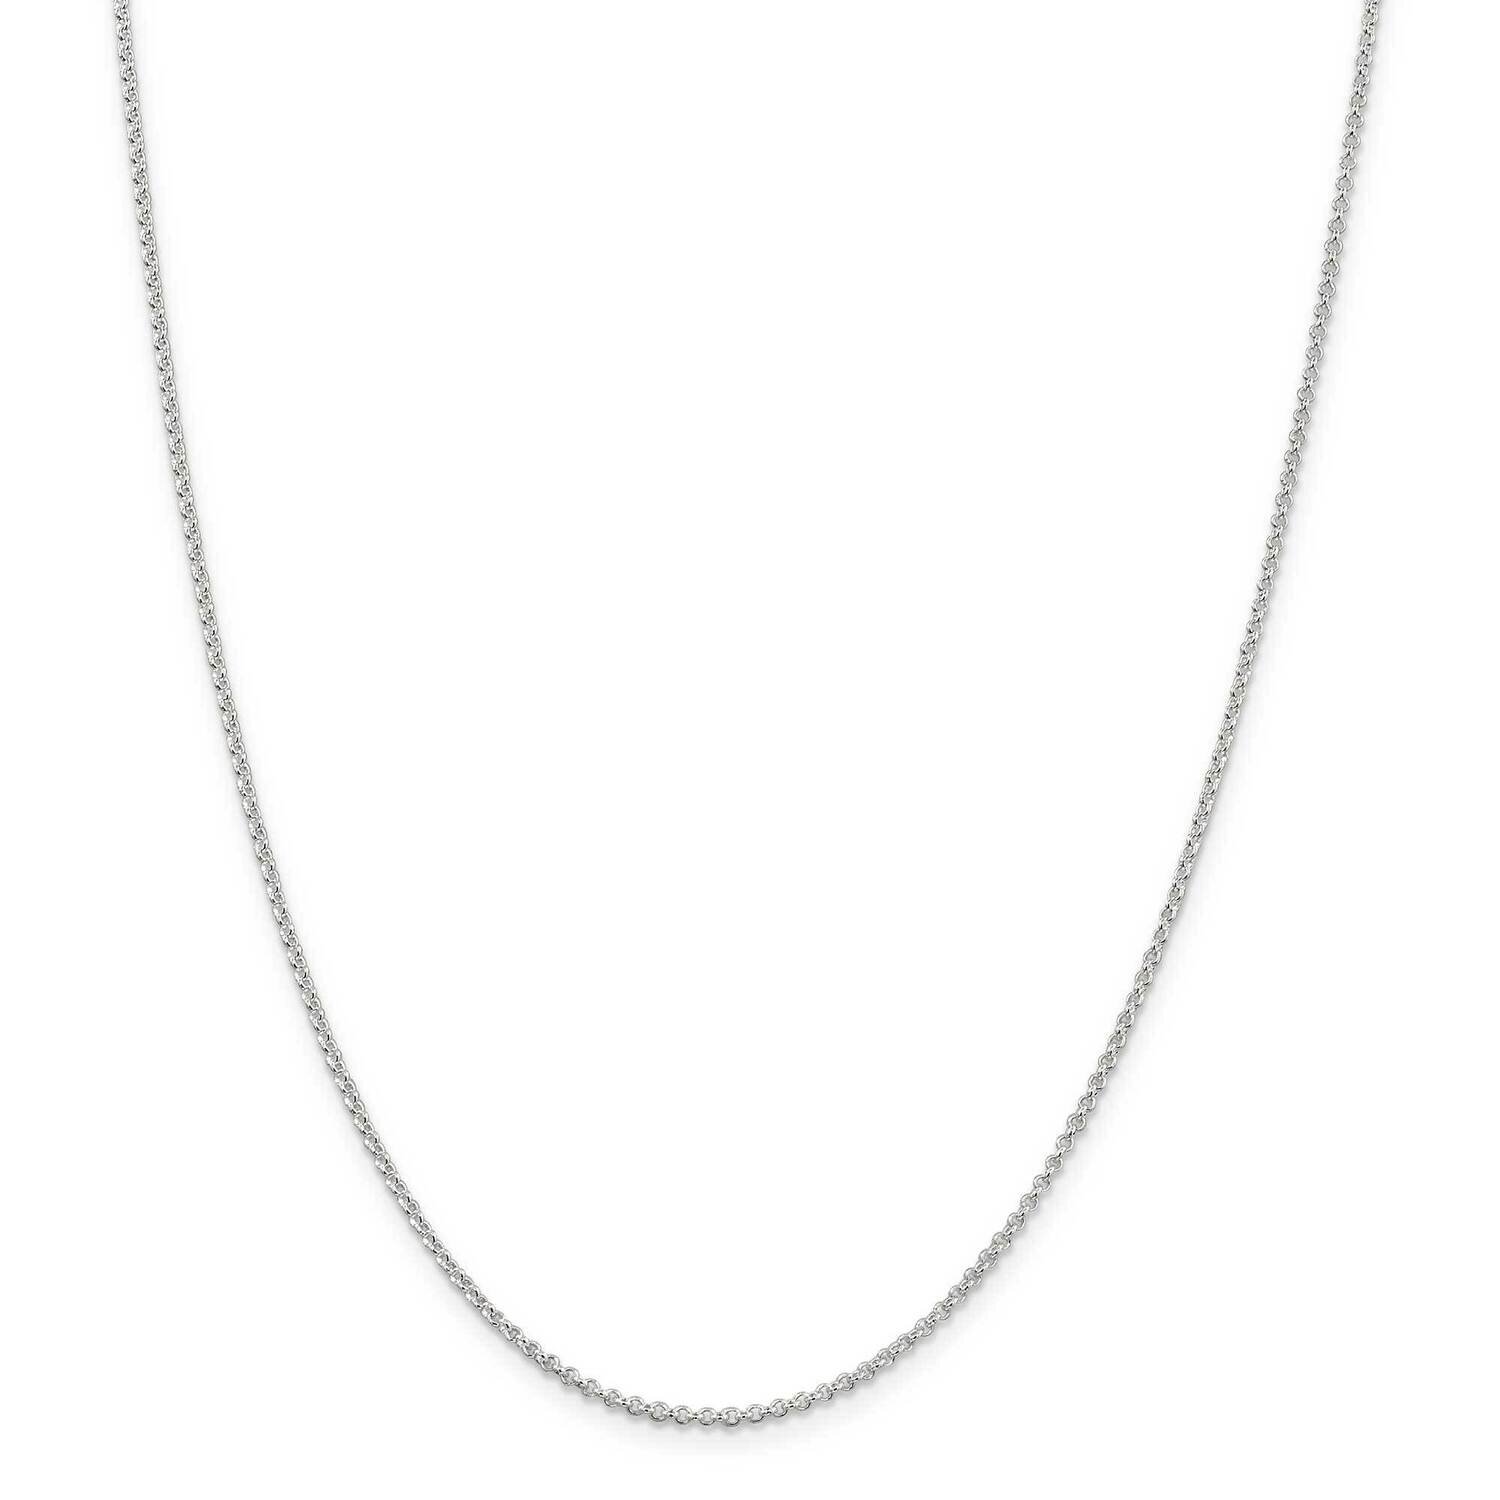 1.5mm Rolo Chain with 2 Inch Extender 18 Inch Sterling Silver QFC103E-18